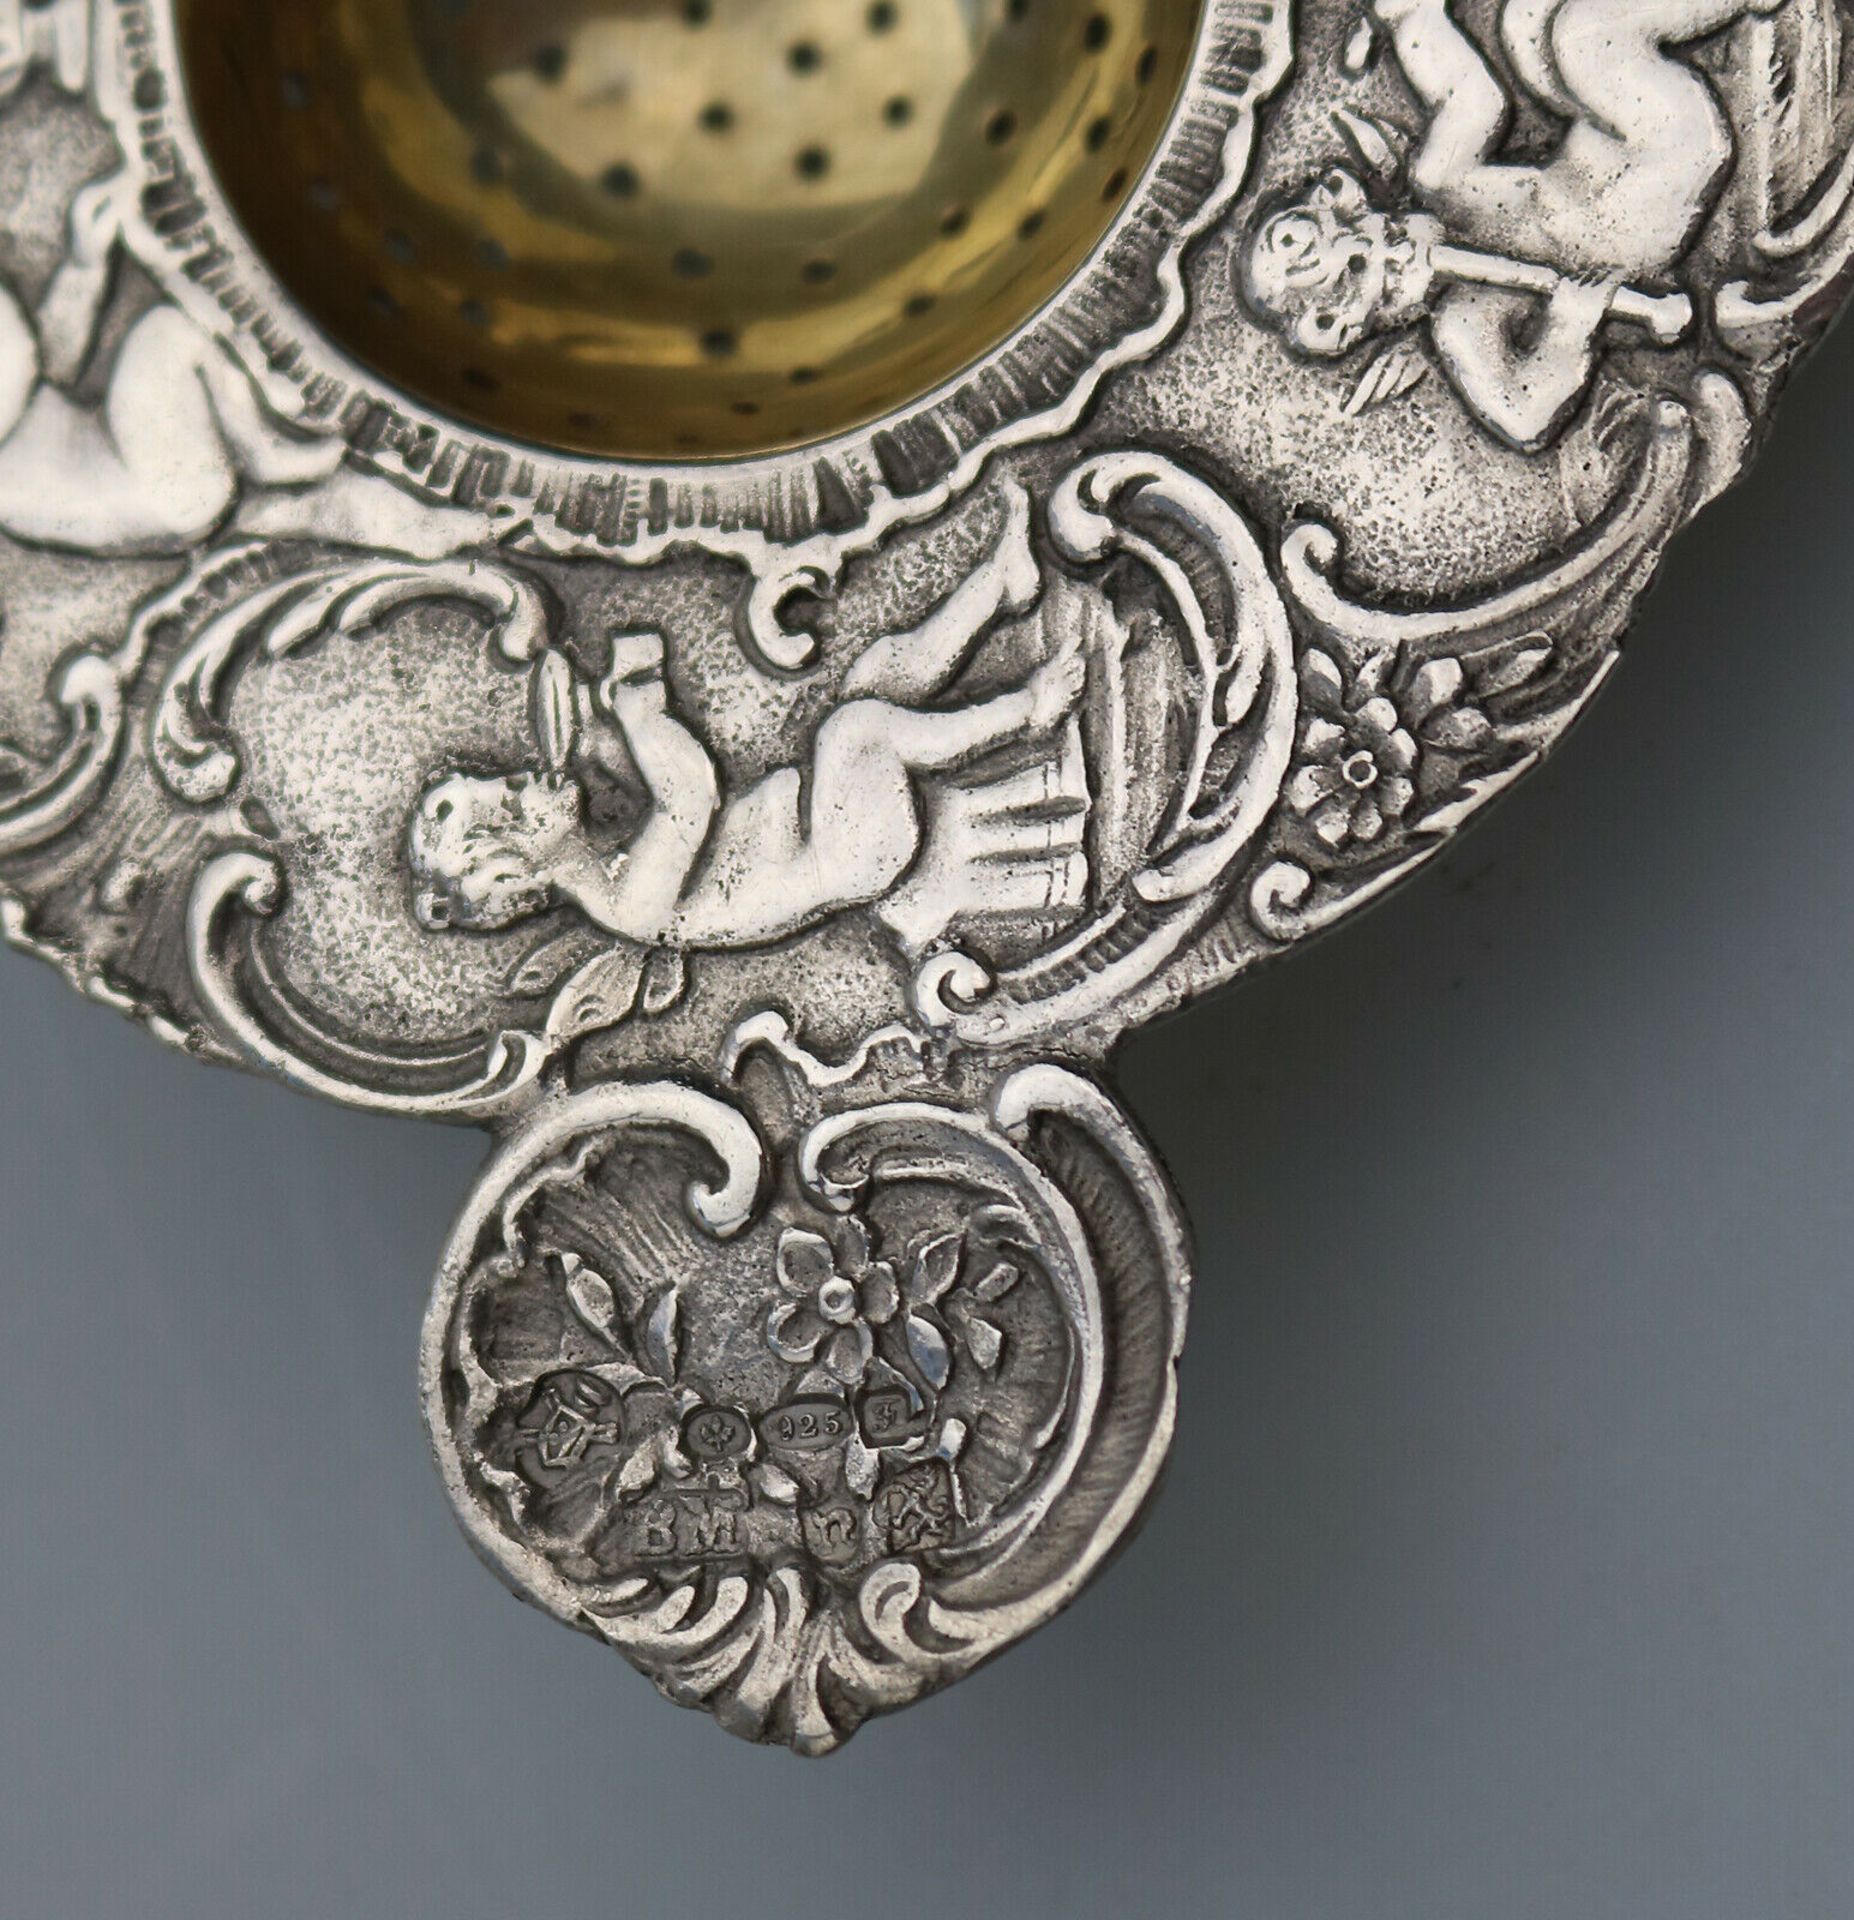 A Fine Hanau 925 Solid Silver Tea Strainer by Berthold Mueller decorated with fairies C.1906 - Image 5 of 5